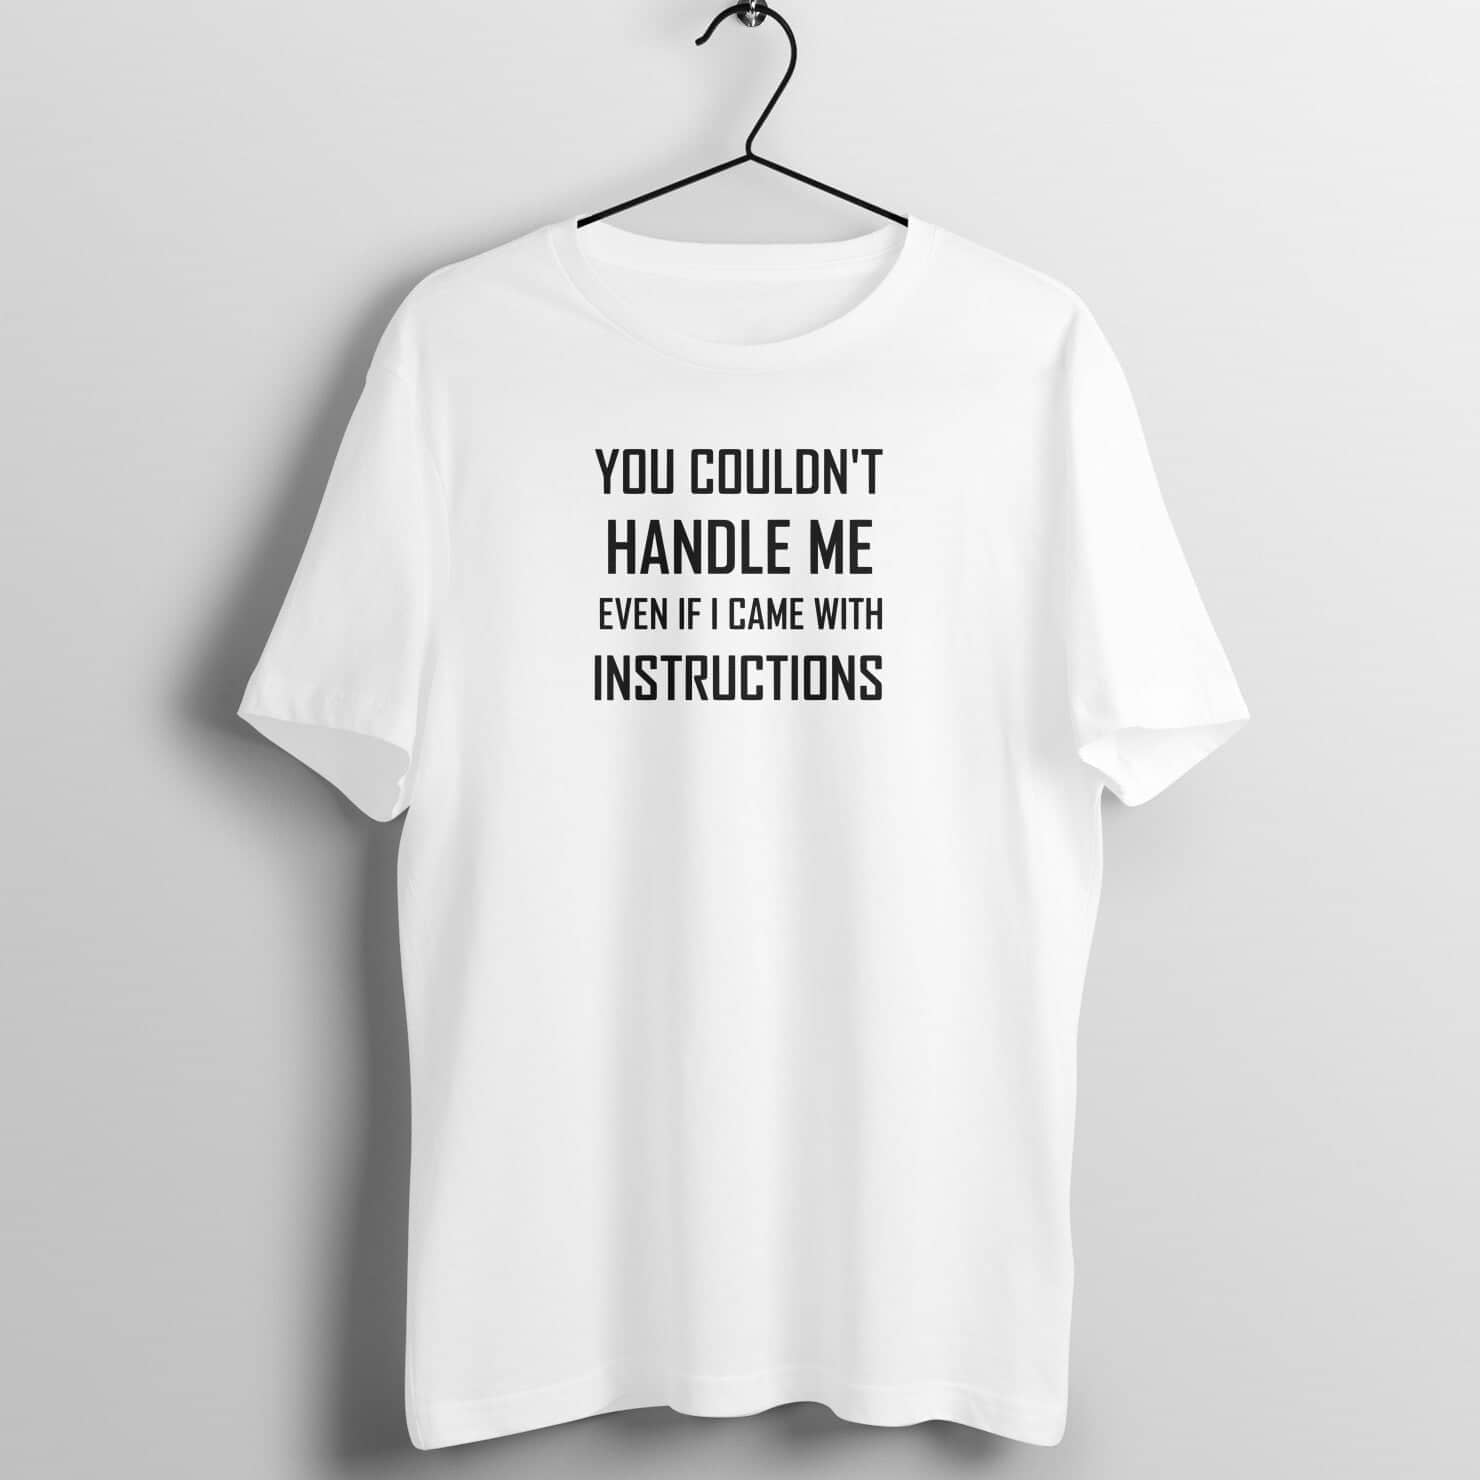 You Can't Handle Me Even If I Came With Instruction Funny White T Shirt for Men and Women freeshipping - Catch My Drift India